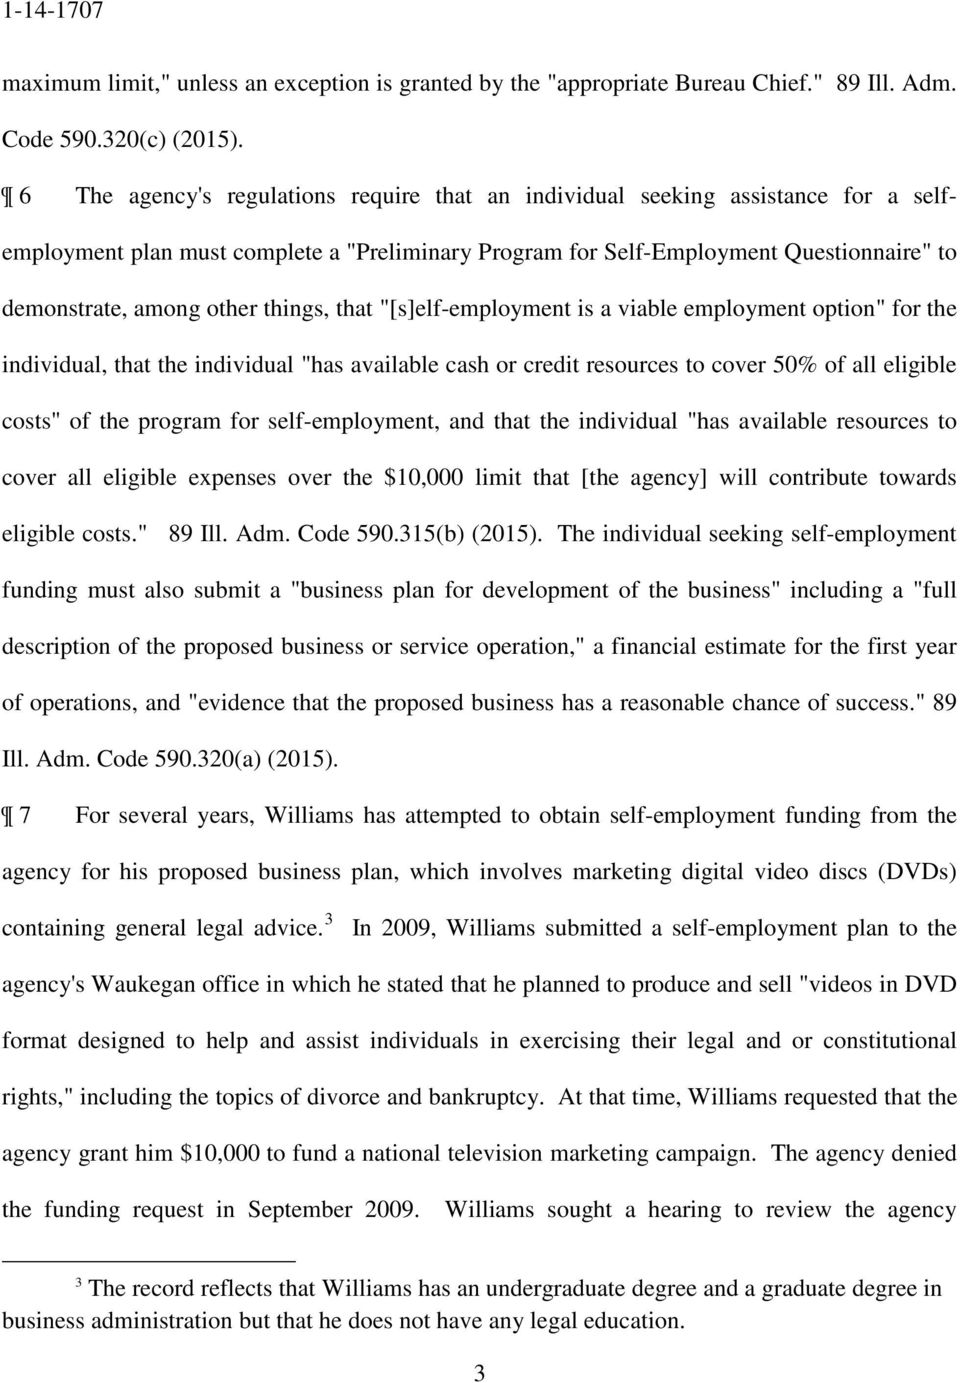 things, that "[s]elf-employment is a viable employment option" for the individual, that the individual "has available cash or credit resources to cover 50% of all eligible costs" of the program for